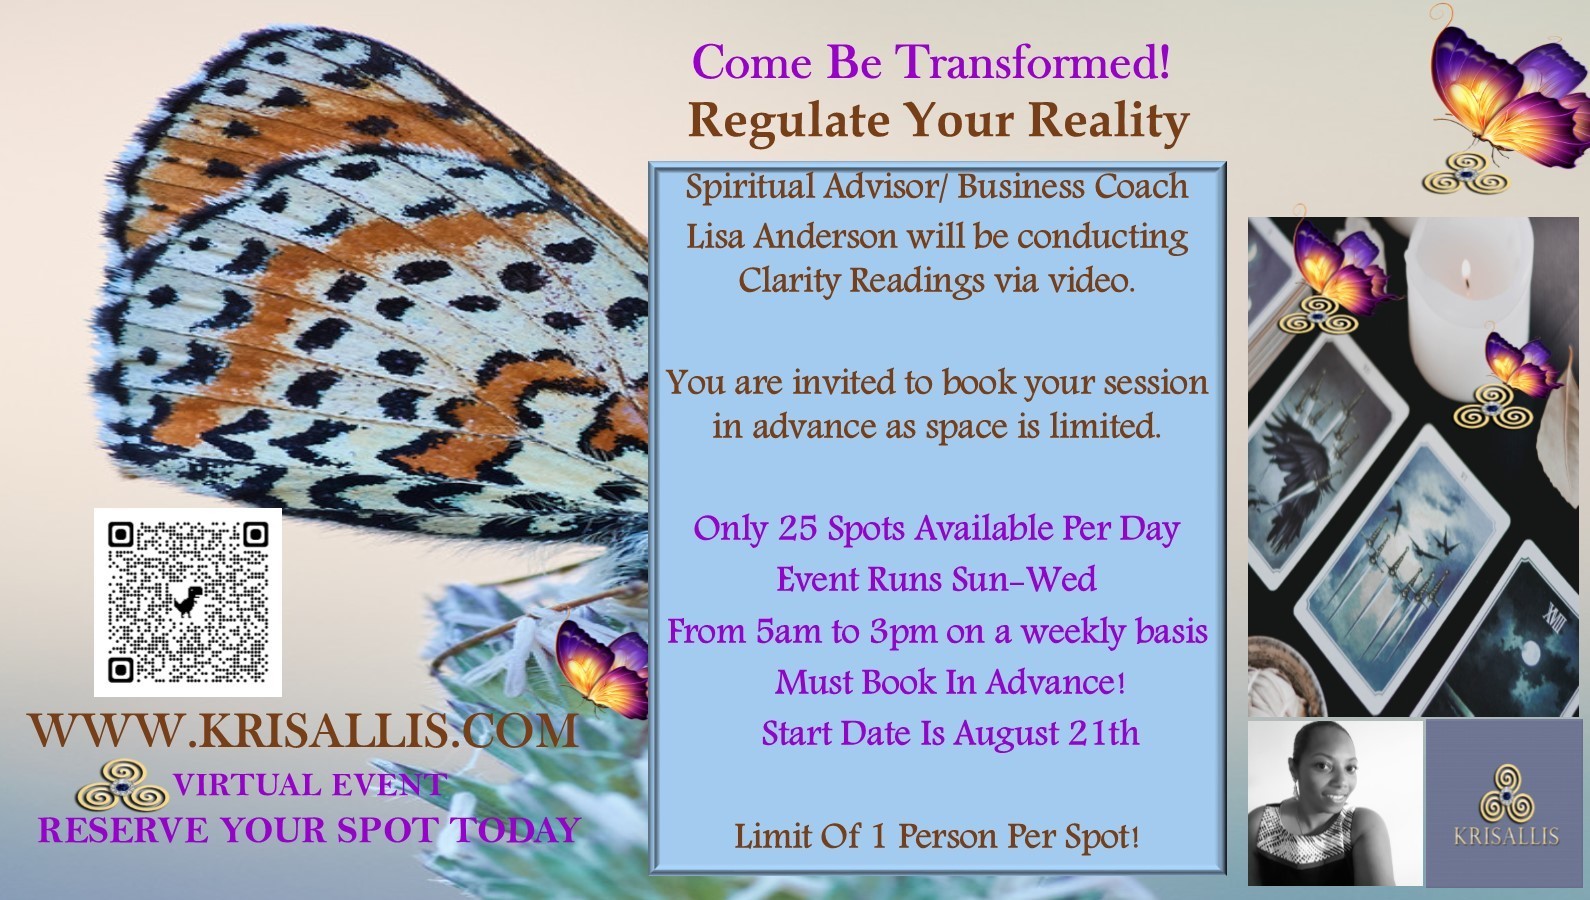 COME BE TRANSFORMED! CLARITY READINGS TO REGULATE YOUR REALITY, Online Event